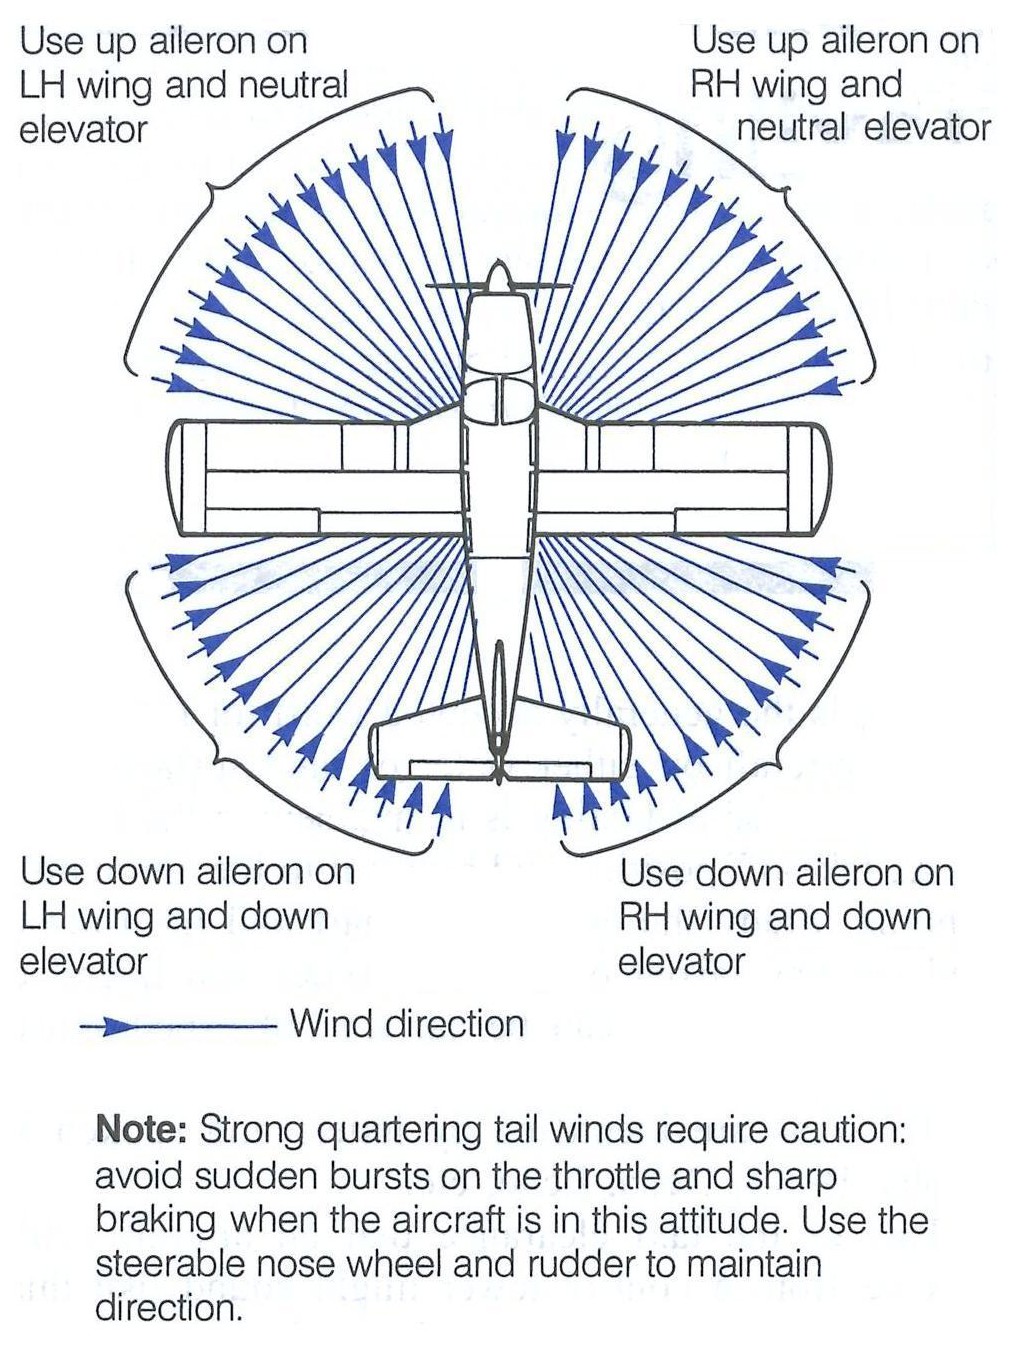 Taxi Inputs for Winds, from the Canadian Flight Training Manual.  Langley Flying School.